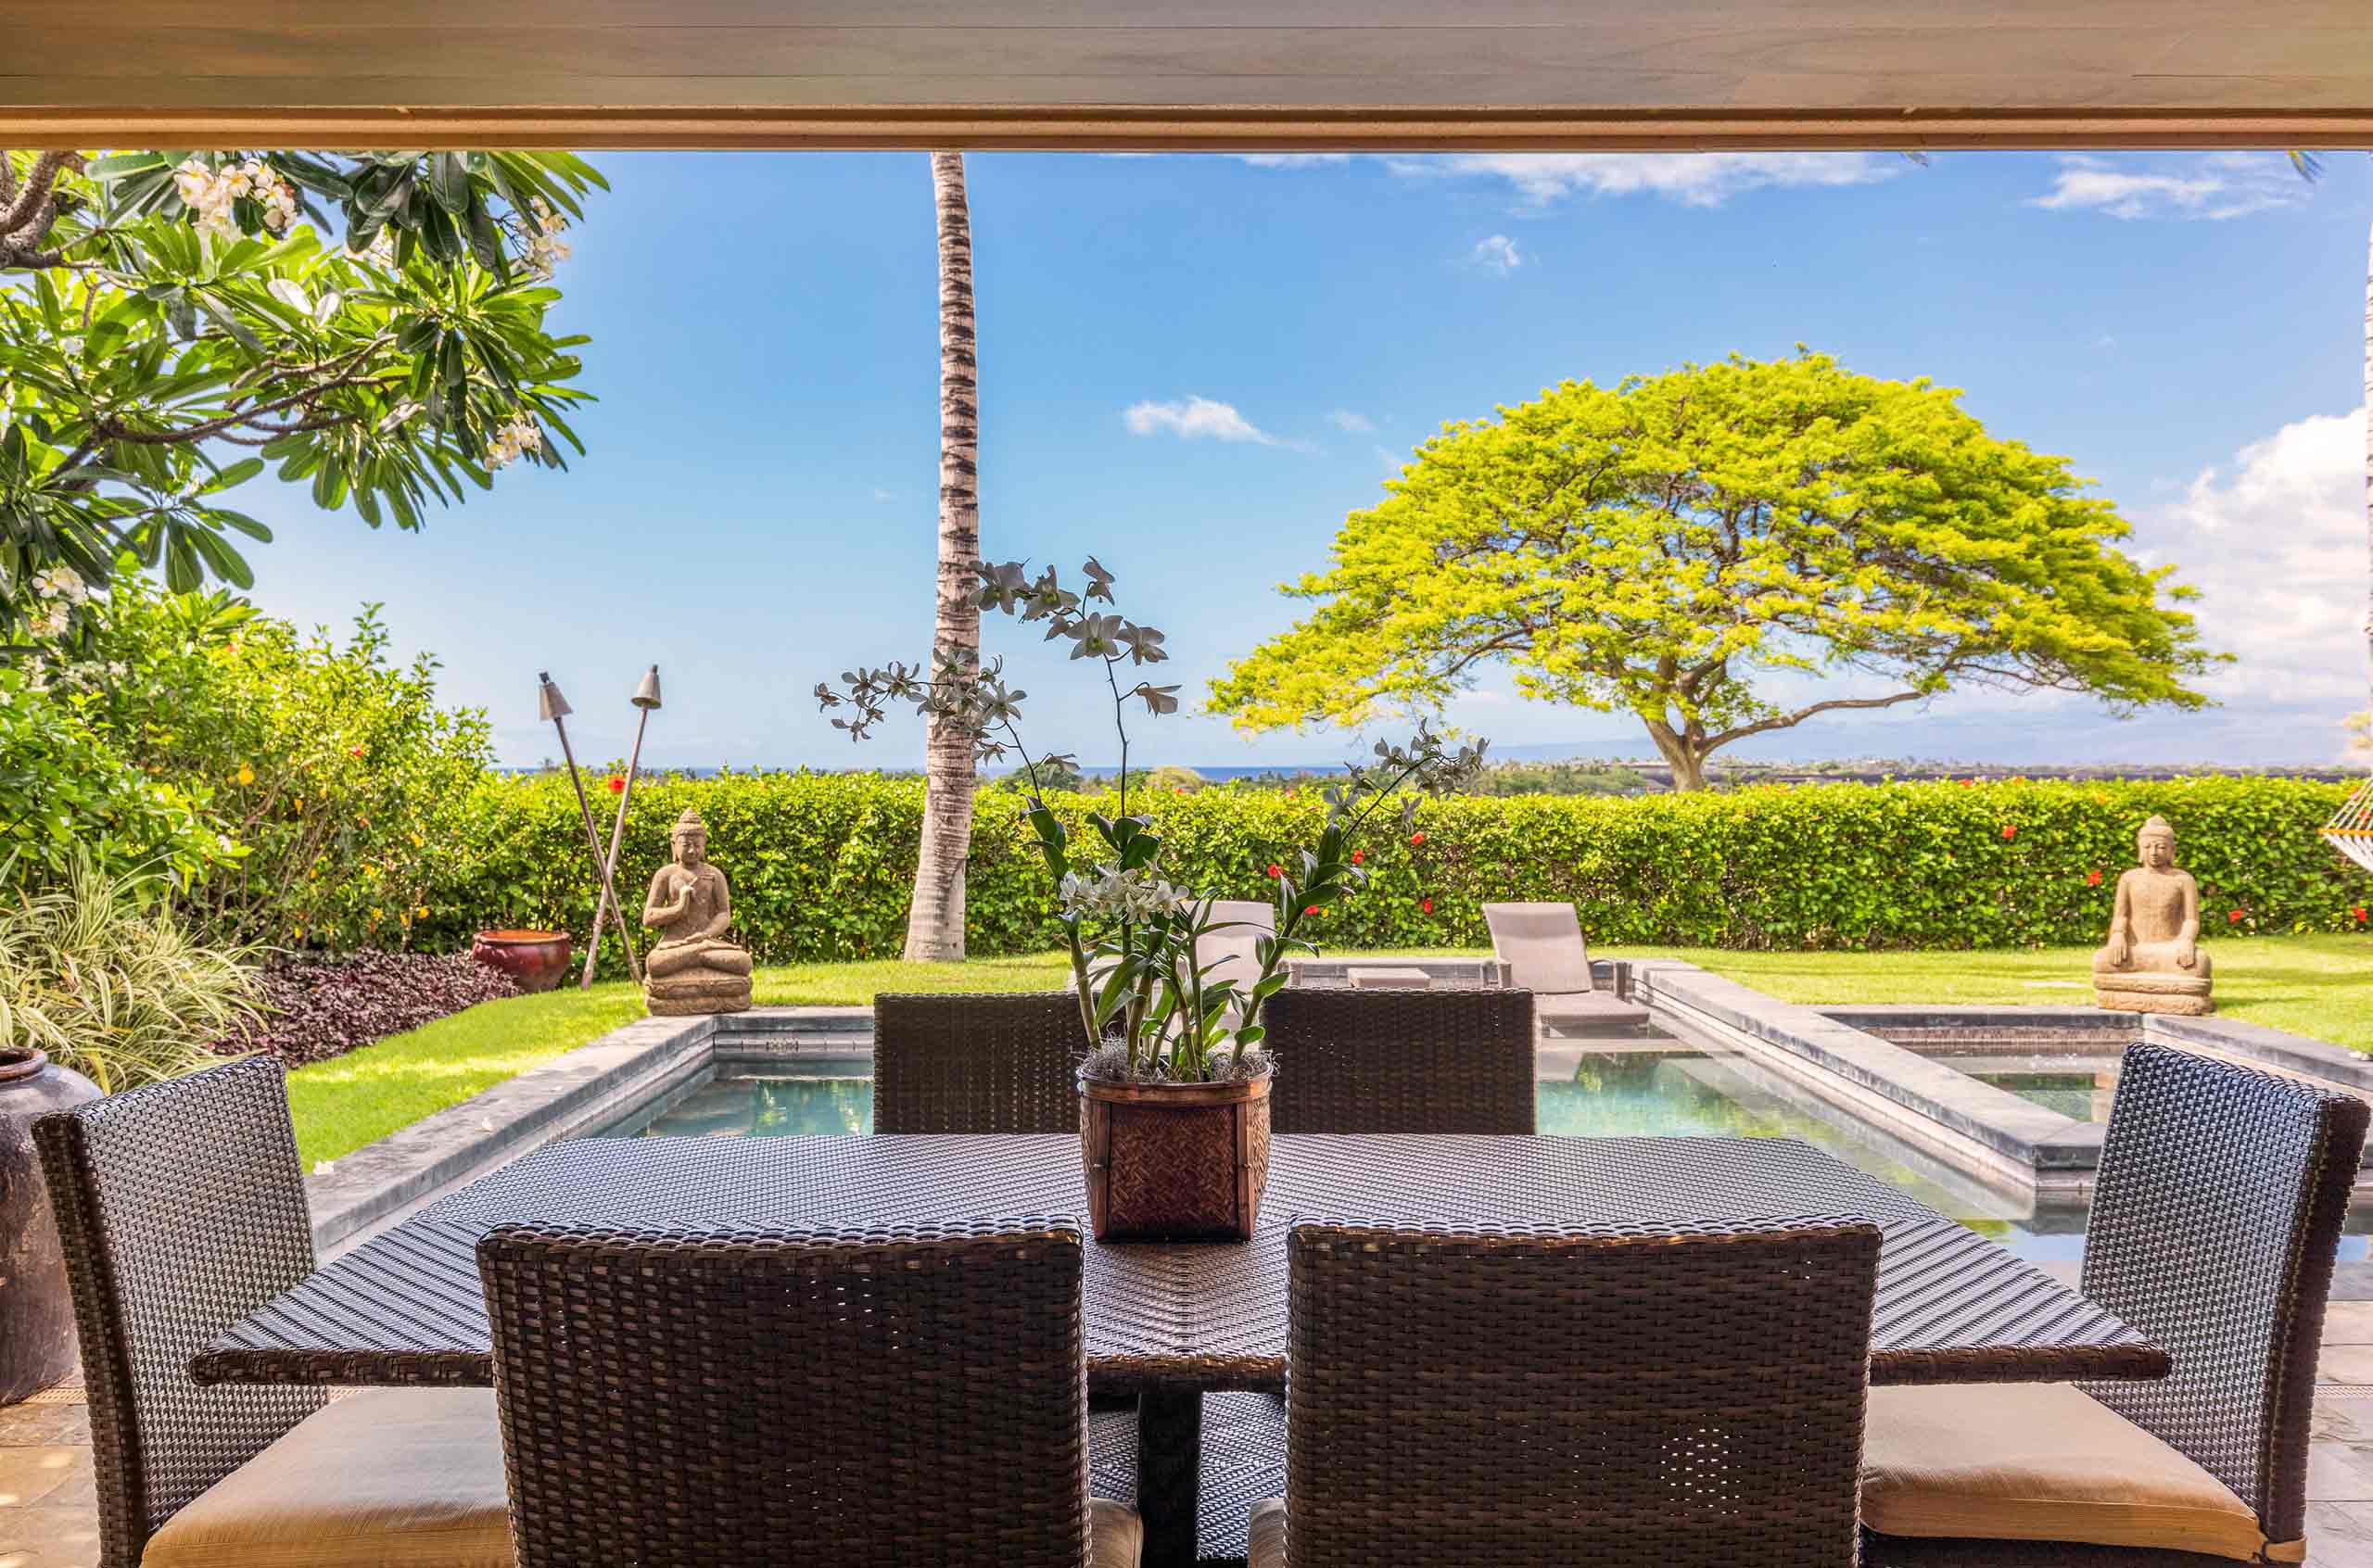 Al fresco dining in a Big Island Cuvée luxury villa with sweeping ocean views, outdoor lounge, and private natural pool and spa.